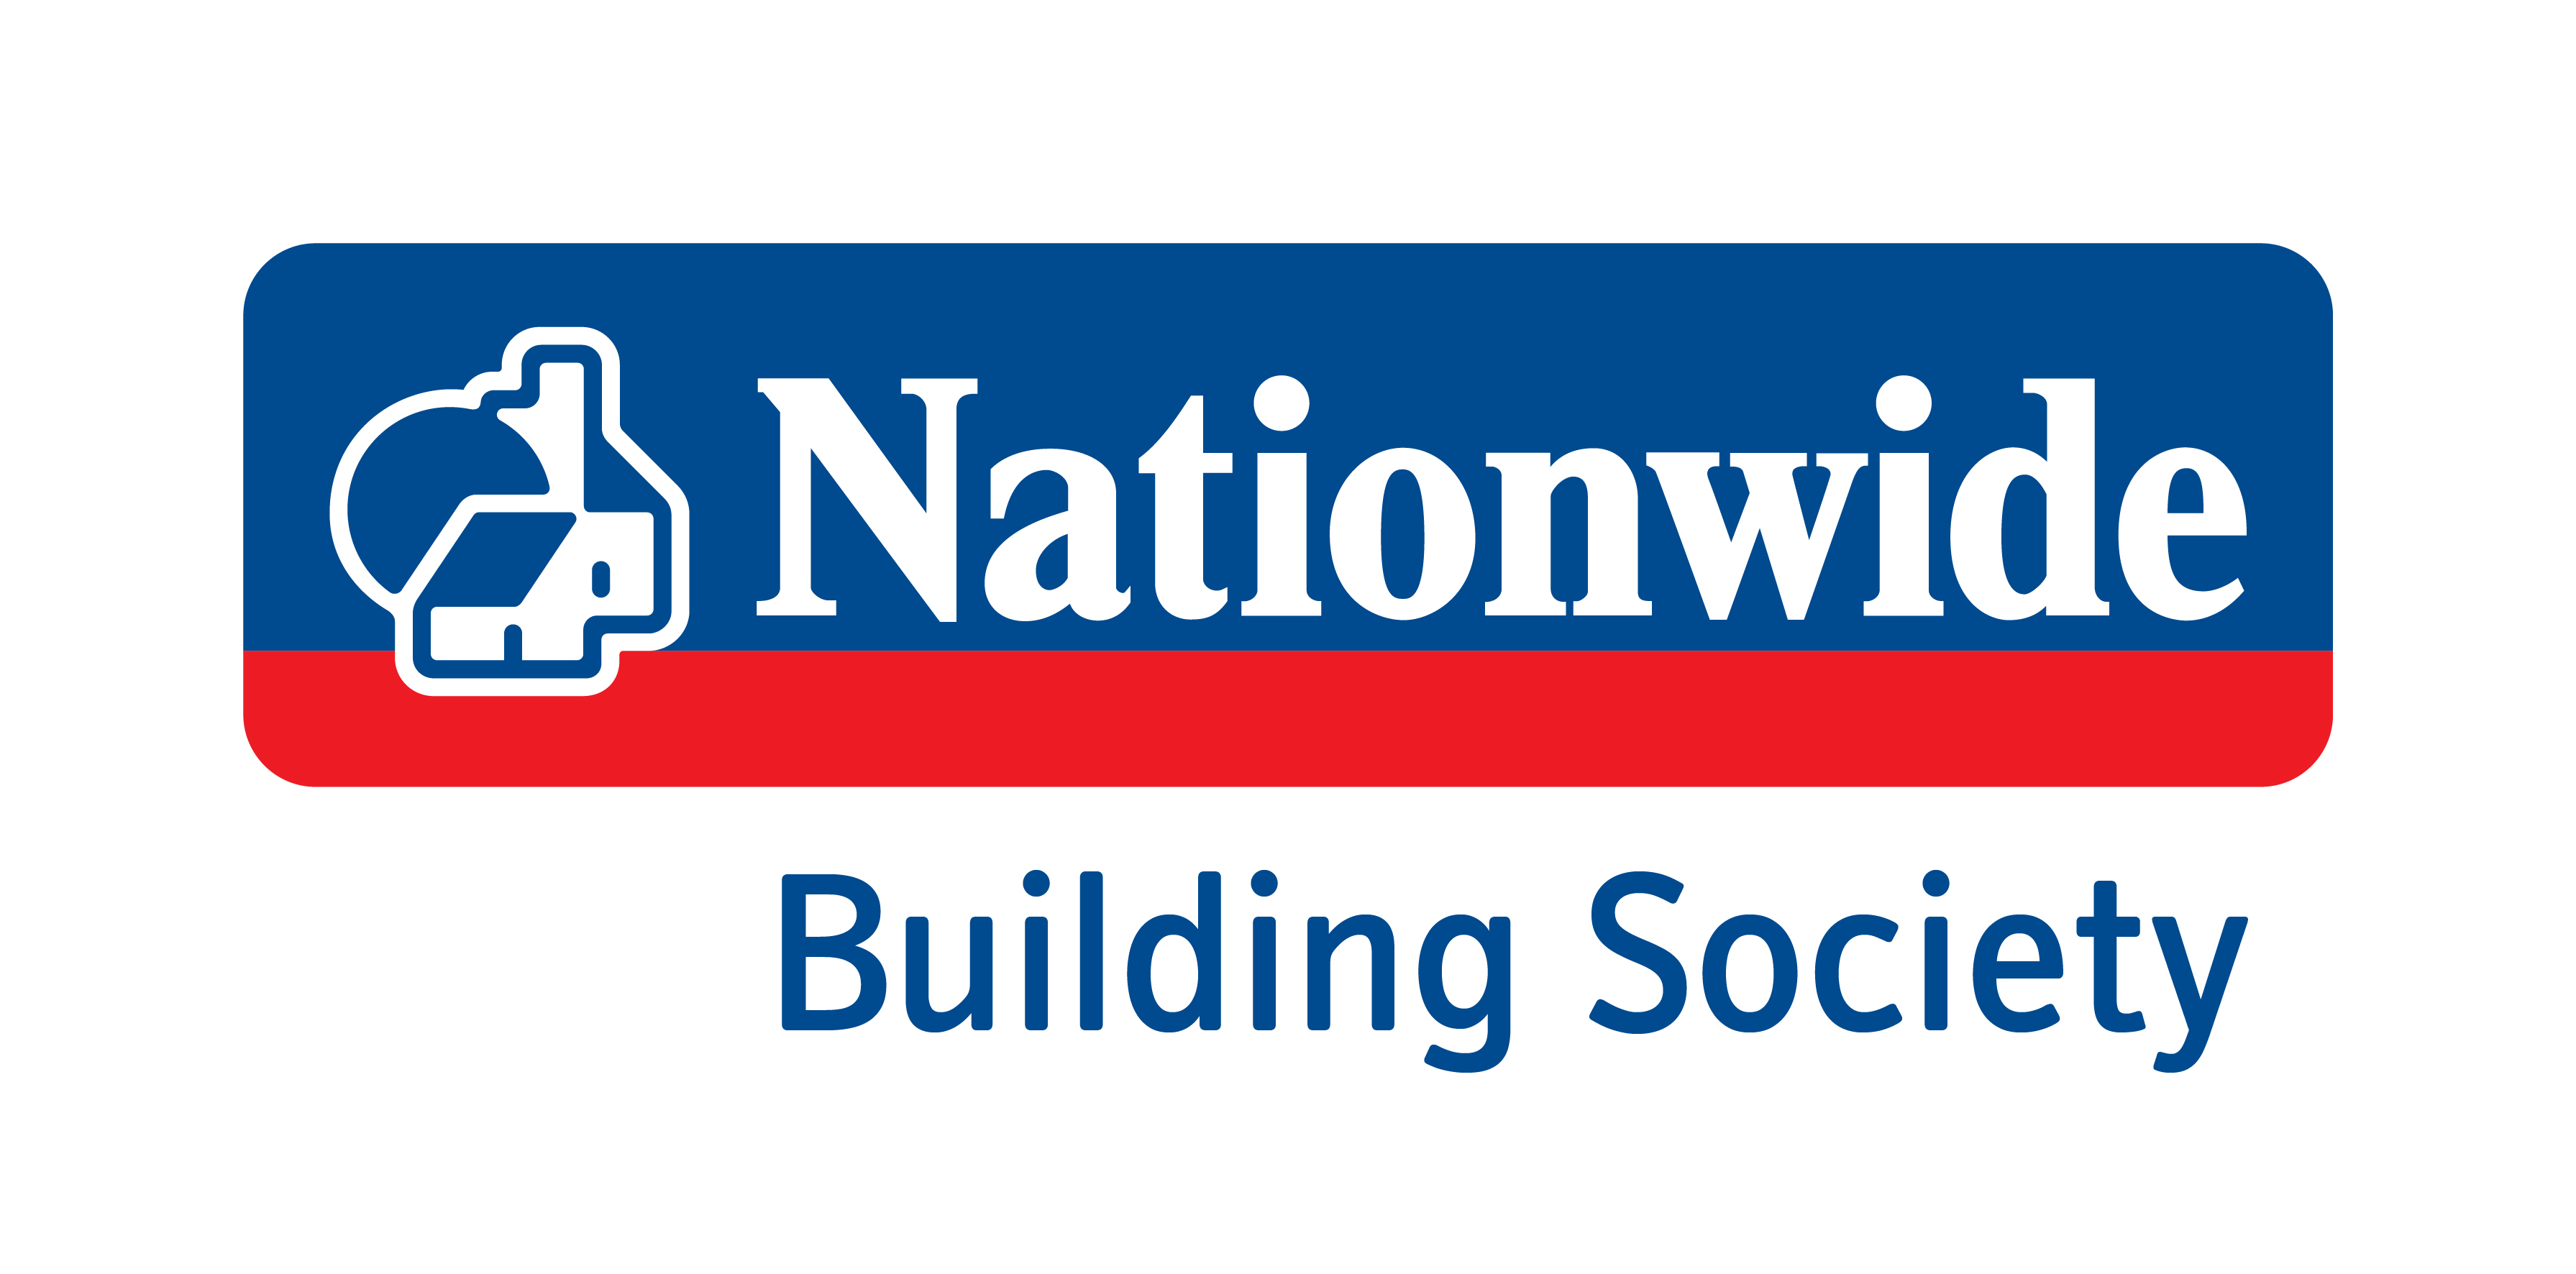 Nationwide offering cheaper rates for property purchases rather than remortgages with latest price improvements